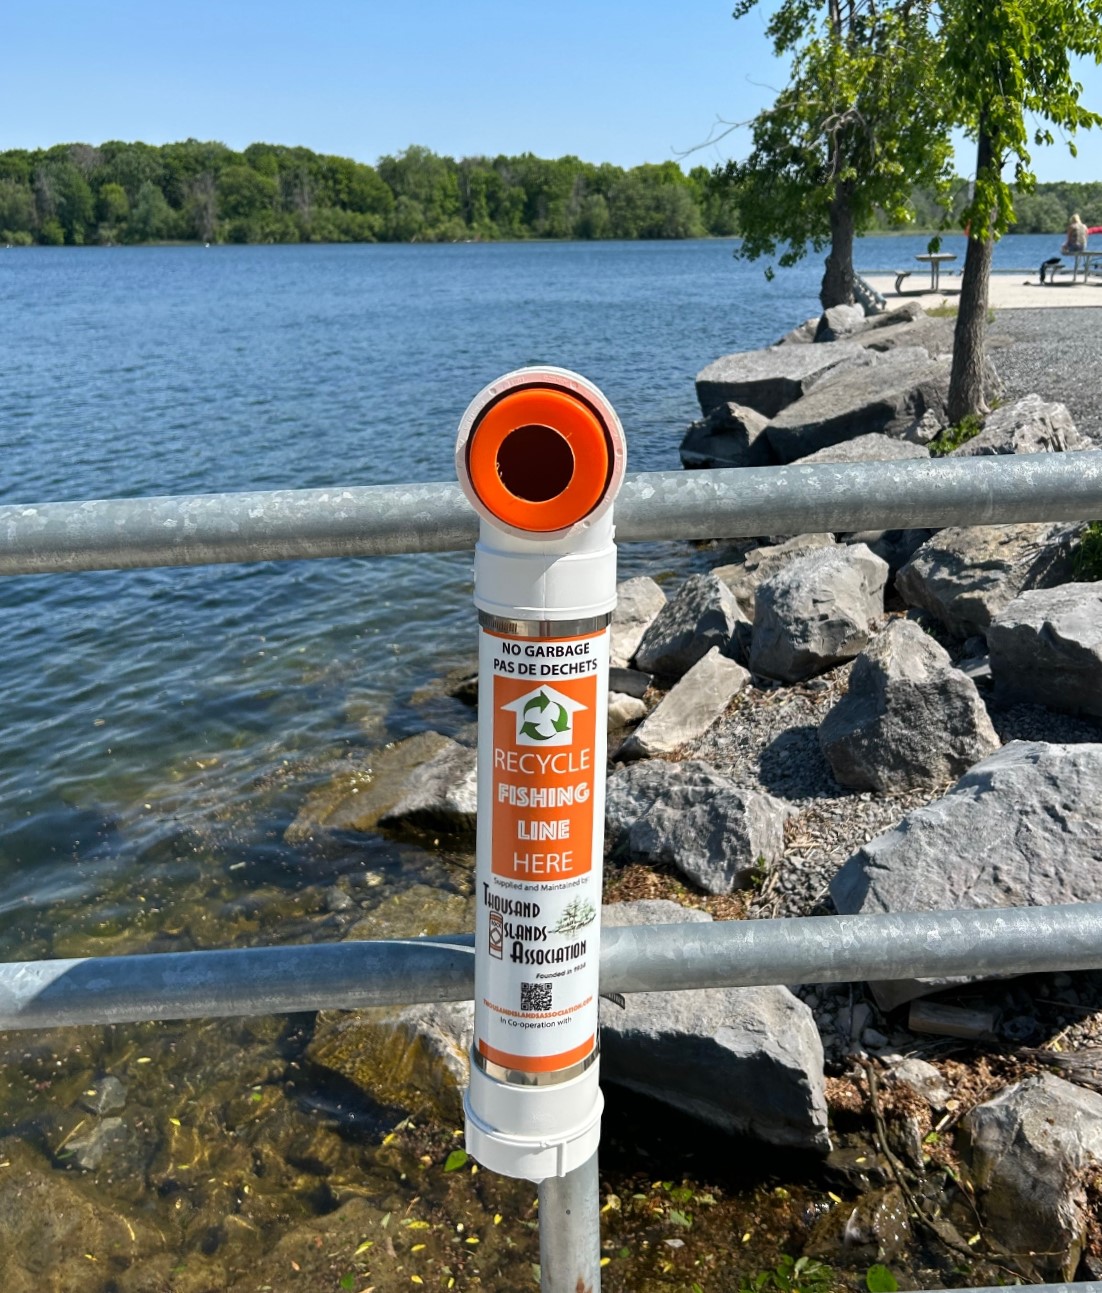 A fishing line recycling collection container attached to the railing at Collins Bay boat launch.